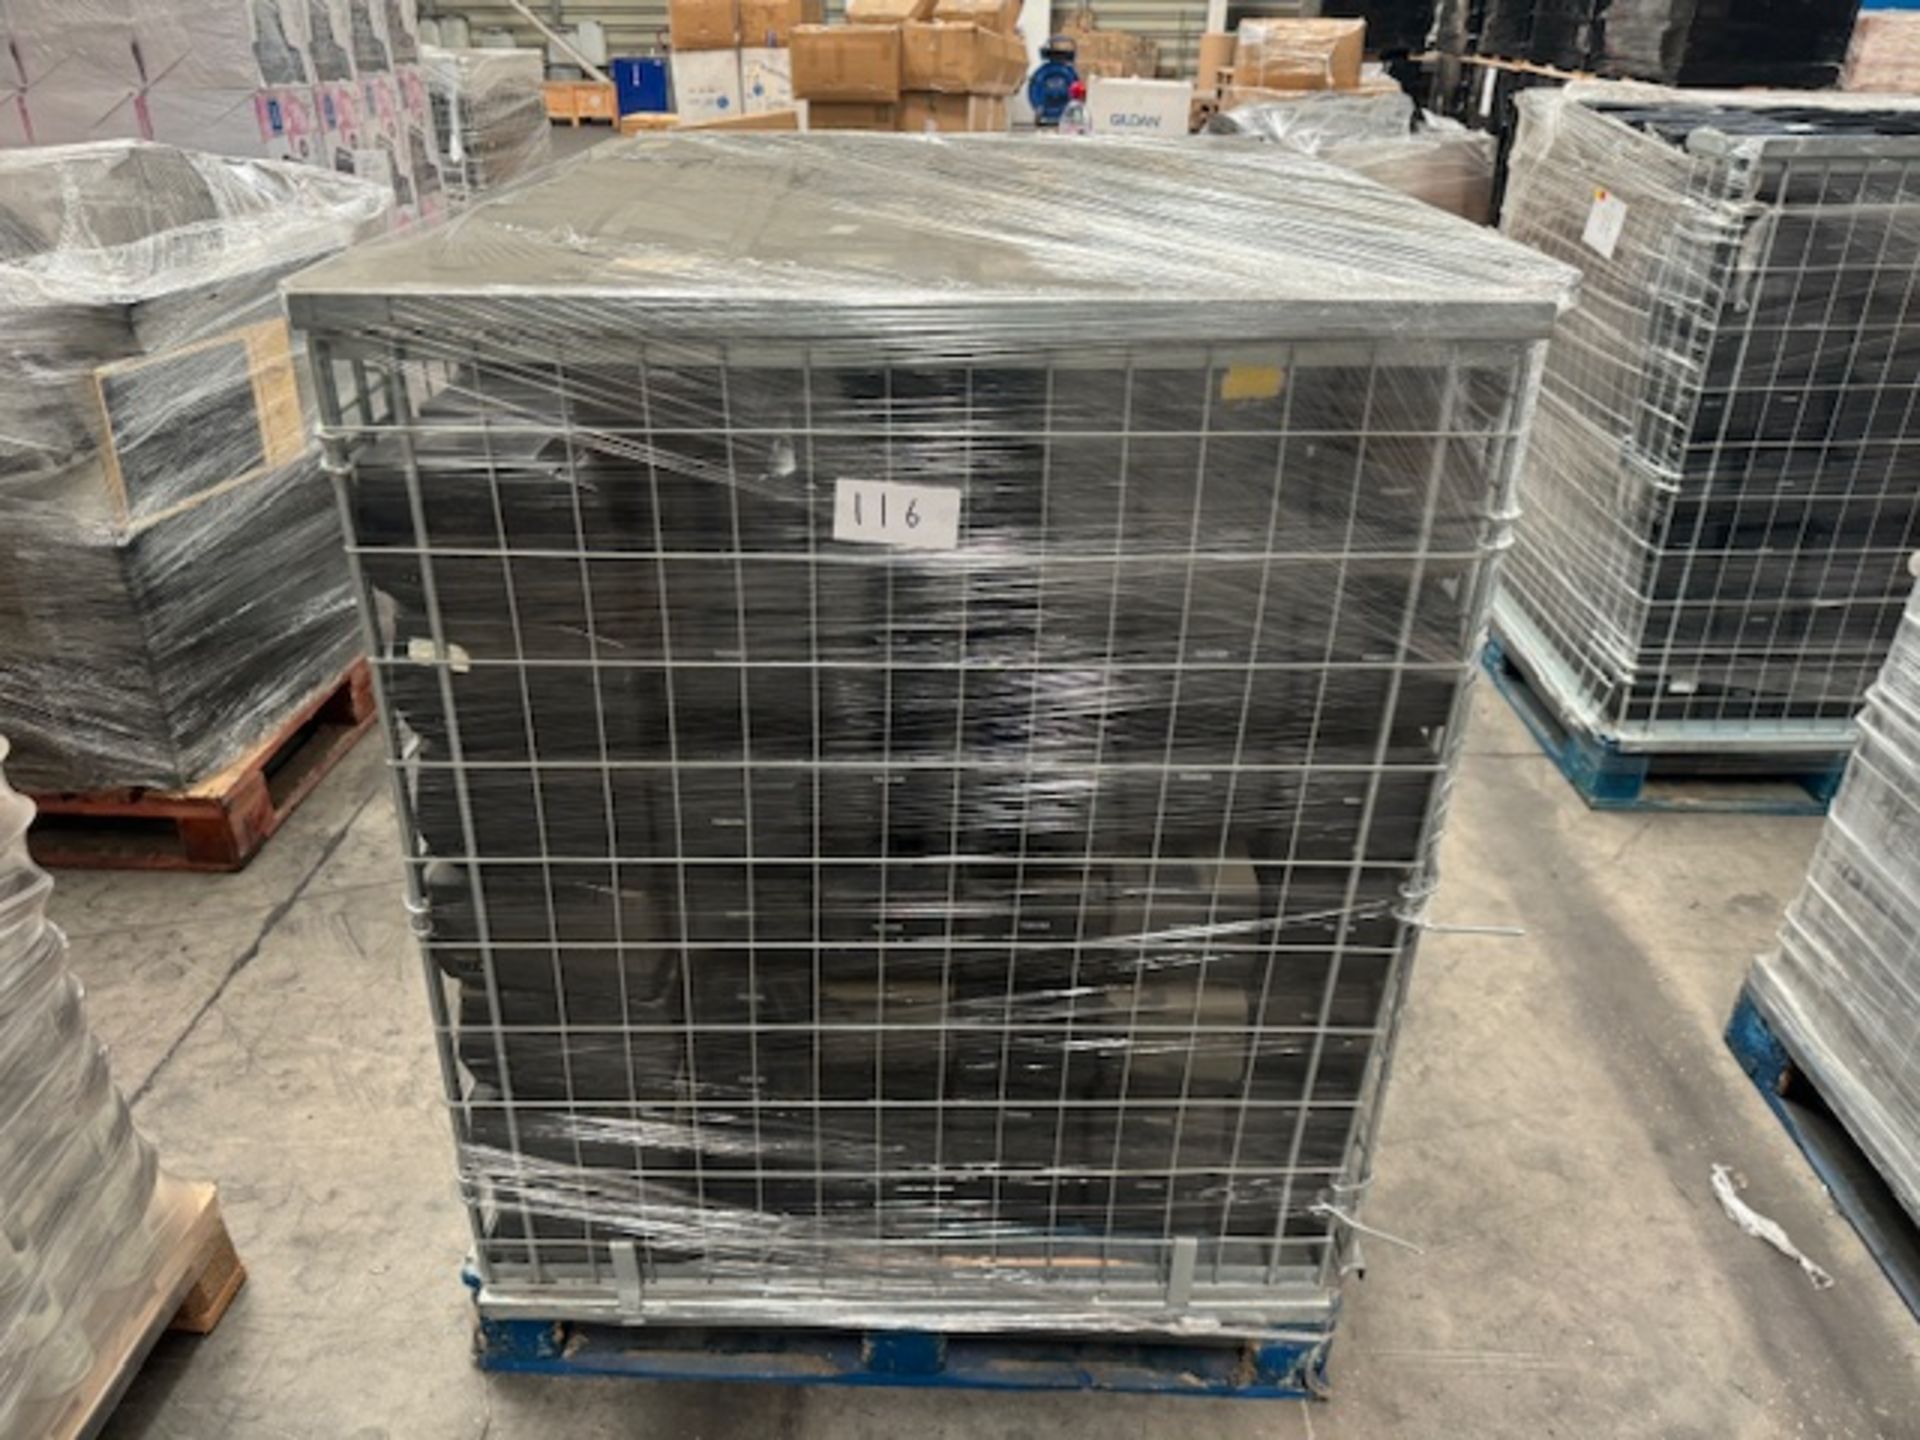 IT PALLET TO CONTAIN 248 TOSHIBA TECHNOLOGY TILL PRINTERS - Image 2 of 2